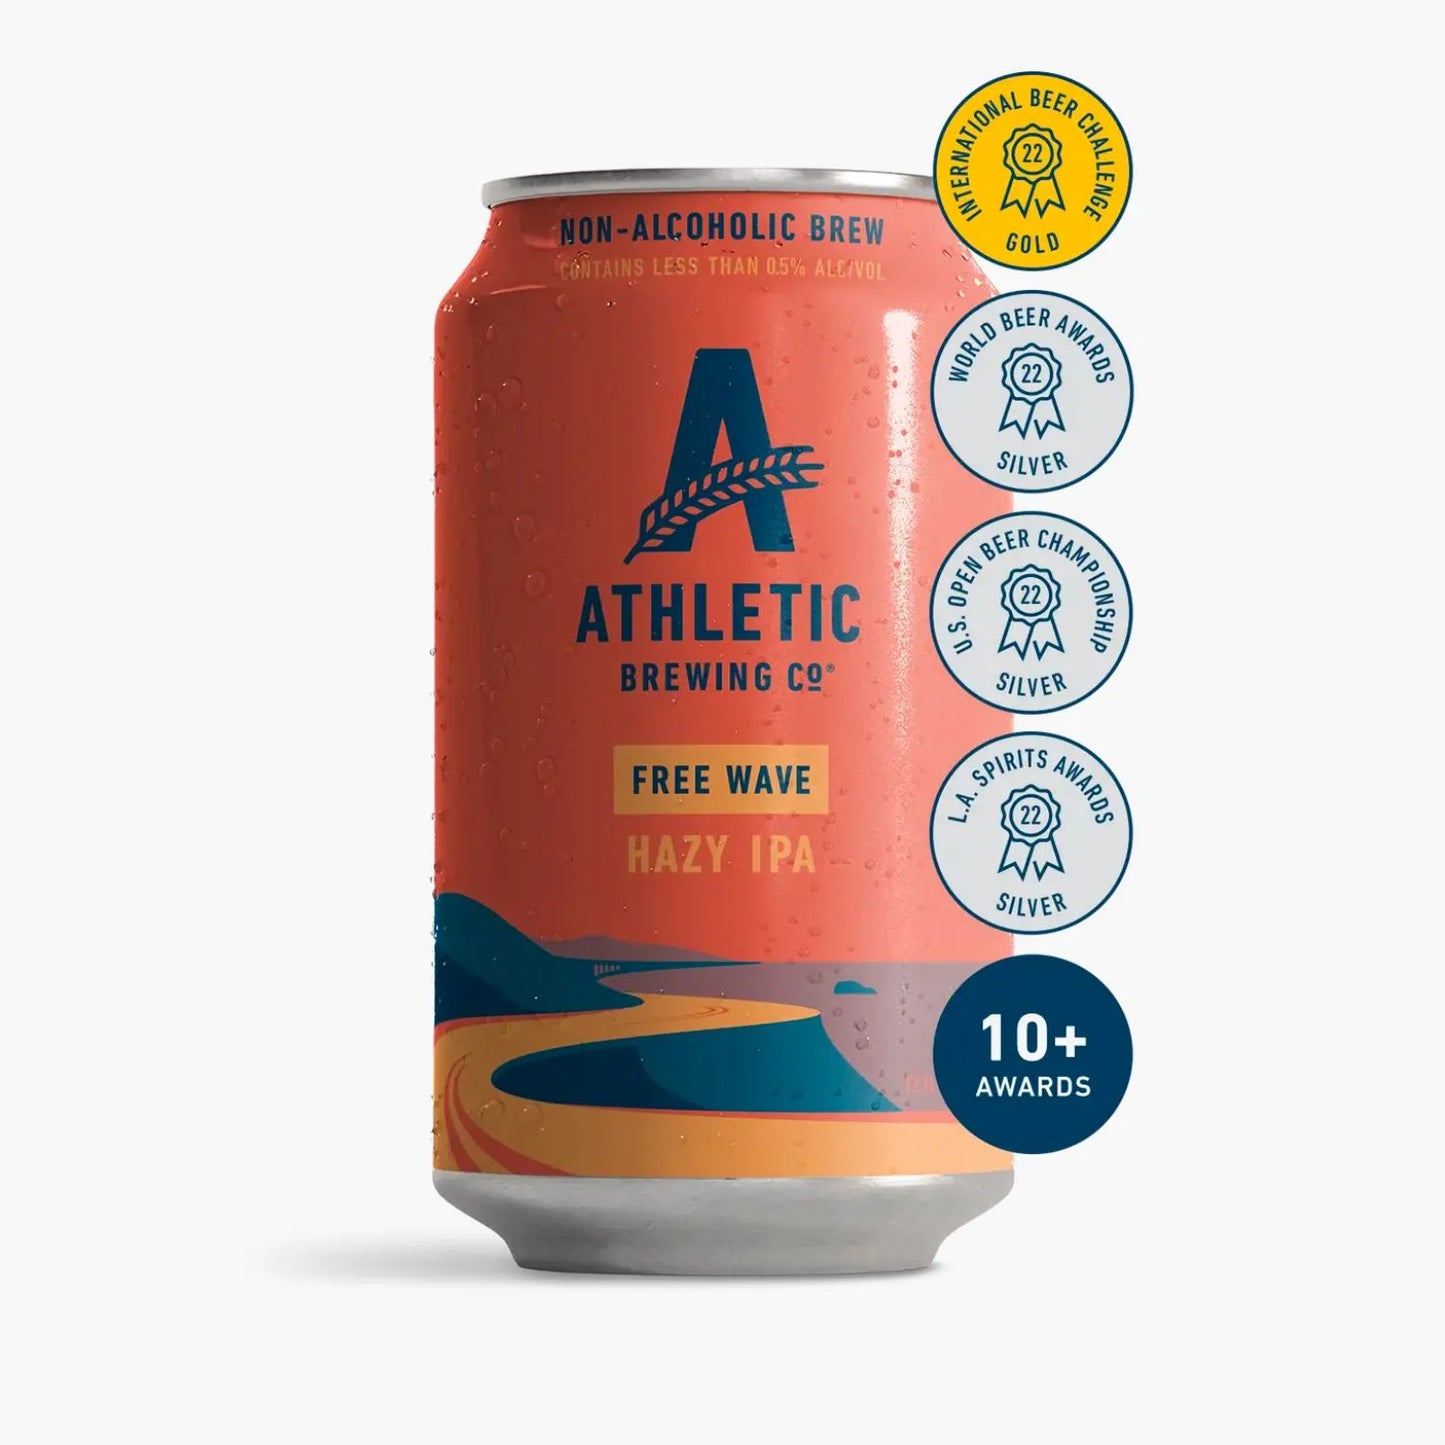 Non-Alcoholic Free Wave Hazy IPA by Athletic Brewing Co